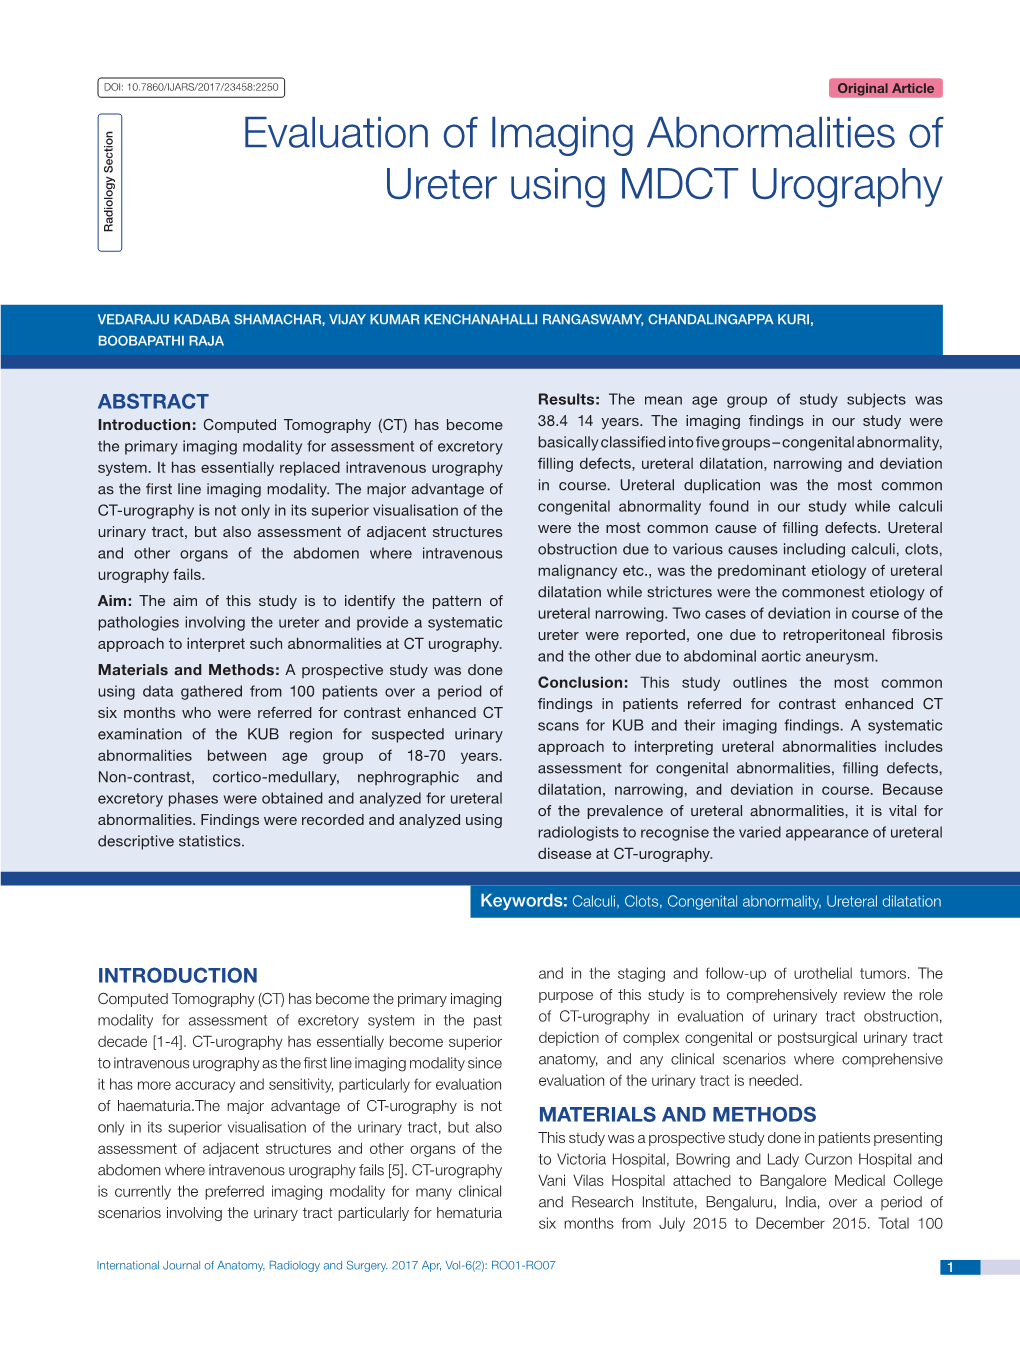 Evaluation of Imaging Abnormalities of Ureter Using MDCT Urography Radiology Section